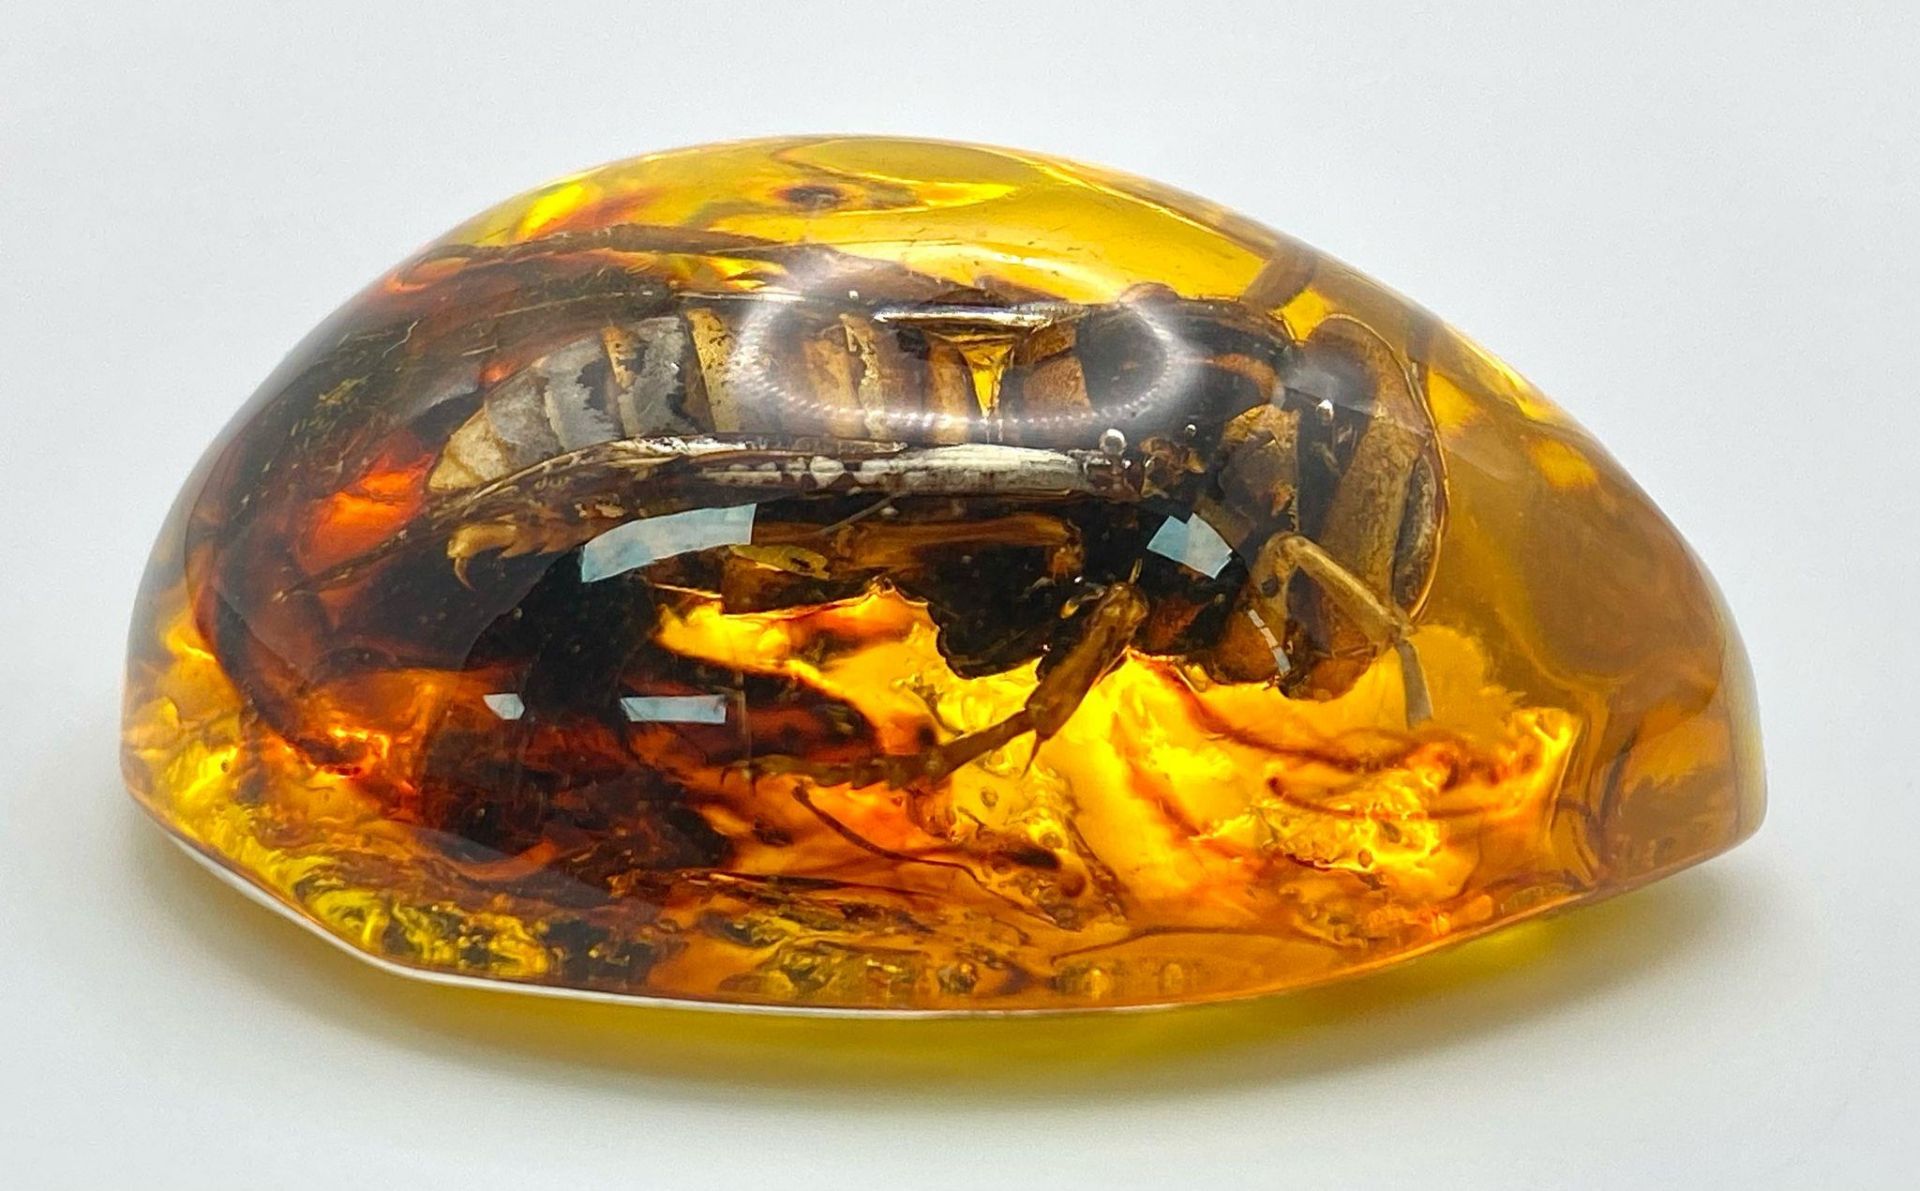 A Rather Large Asian Hornet Relaxes in an Amber Resin Bath. Pendant or paperweight. 6cm - Image 2 of 2